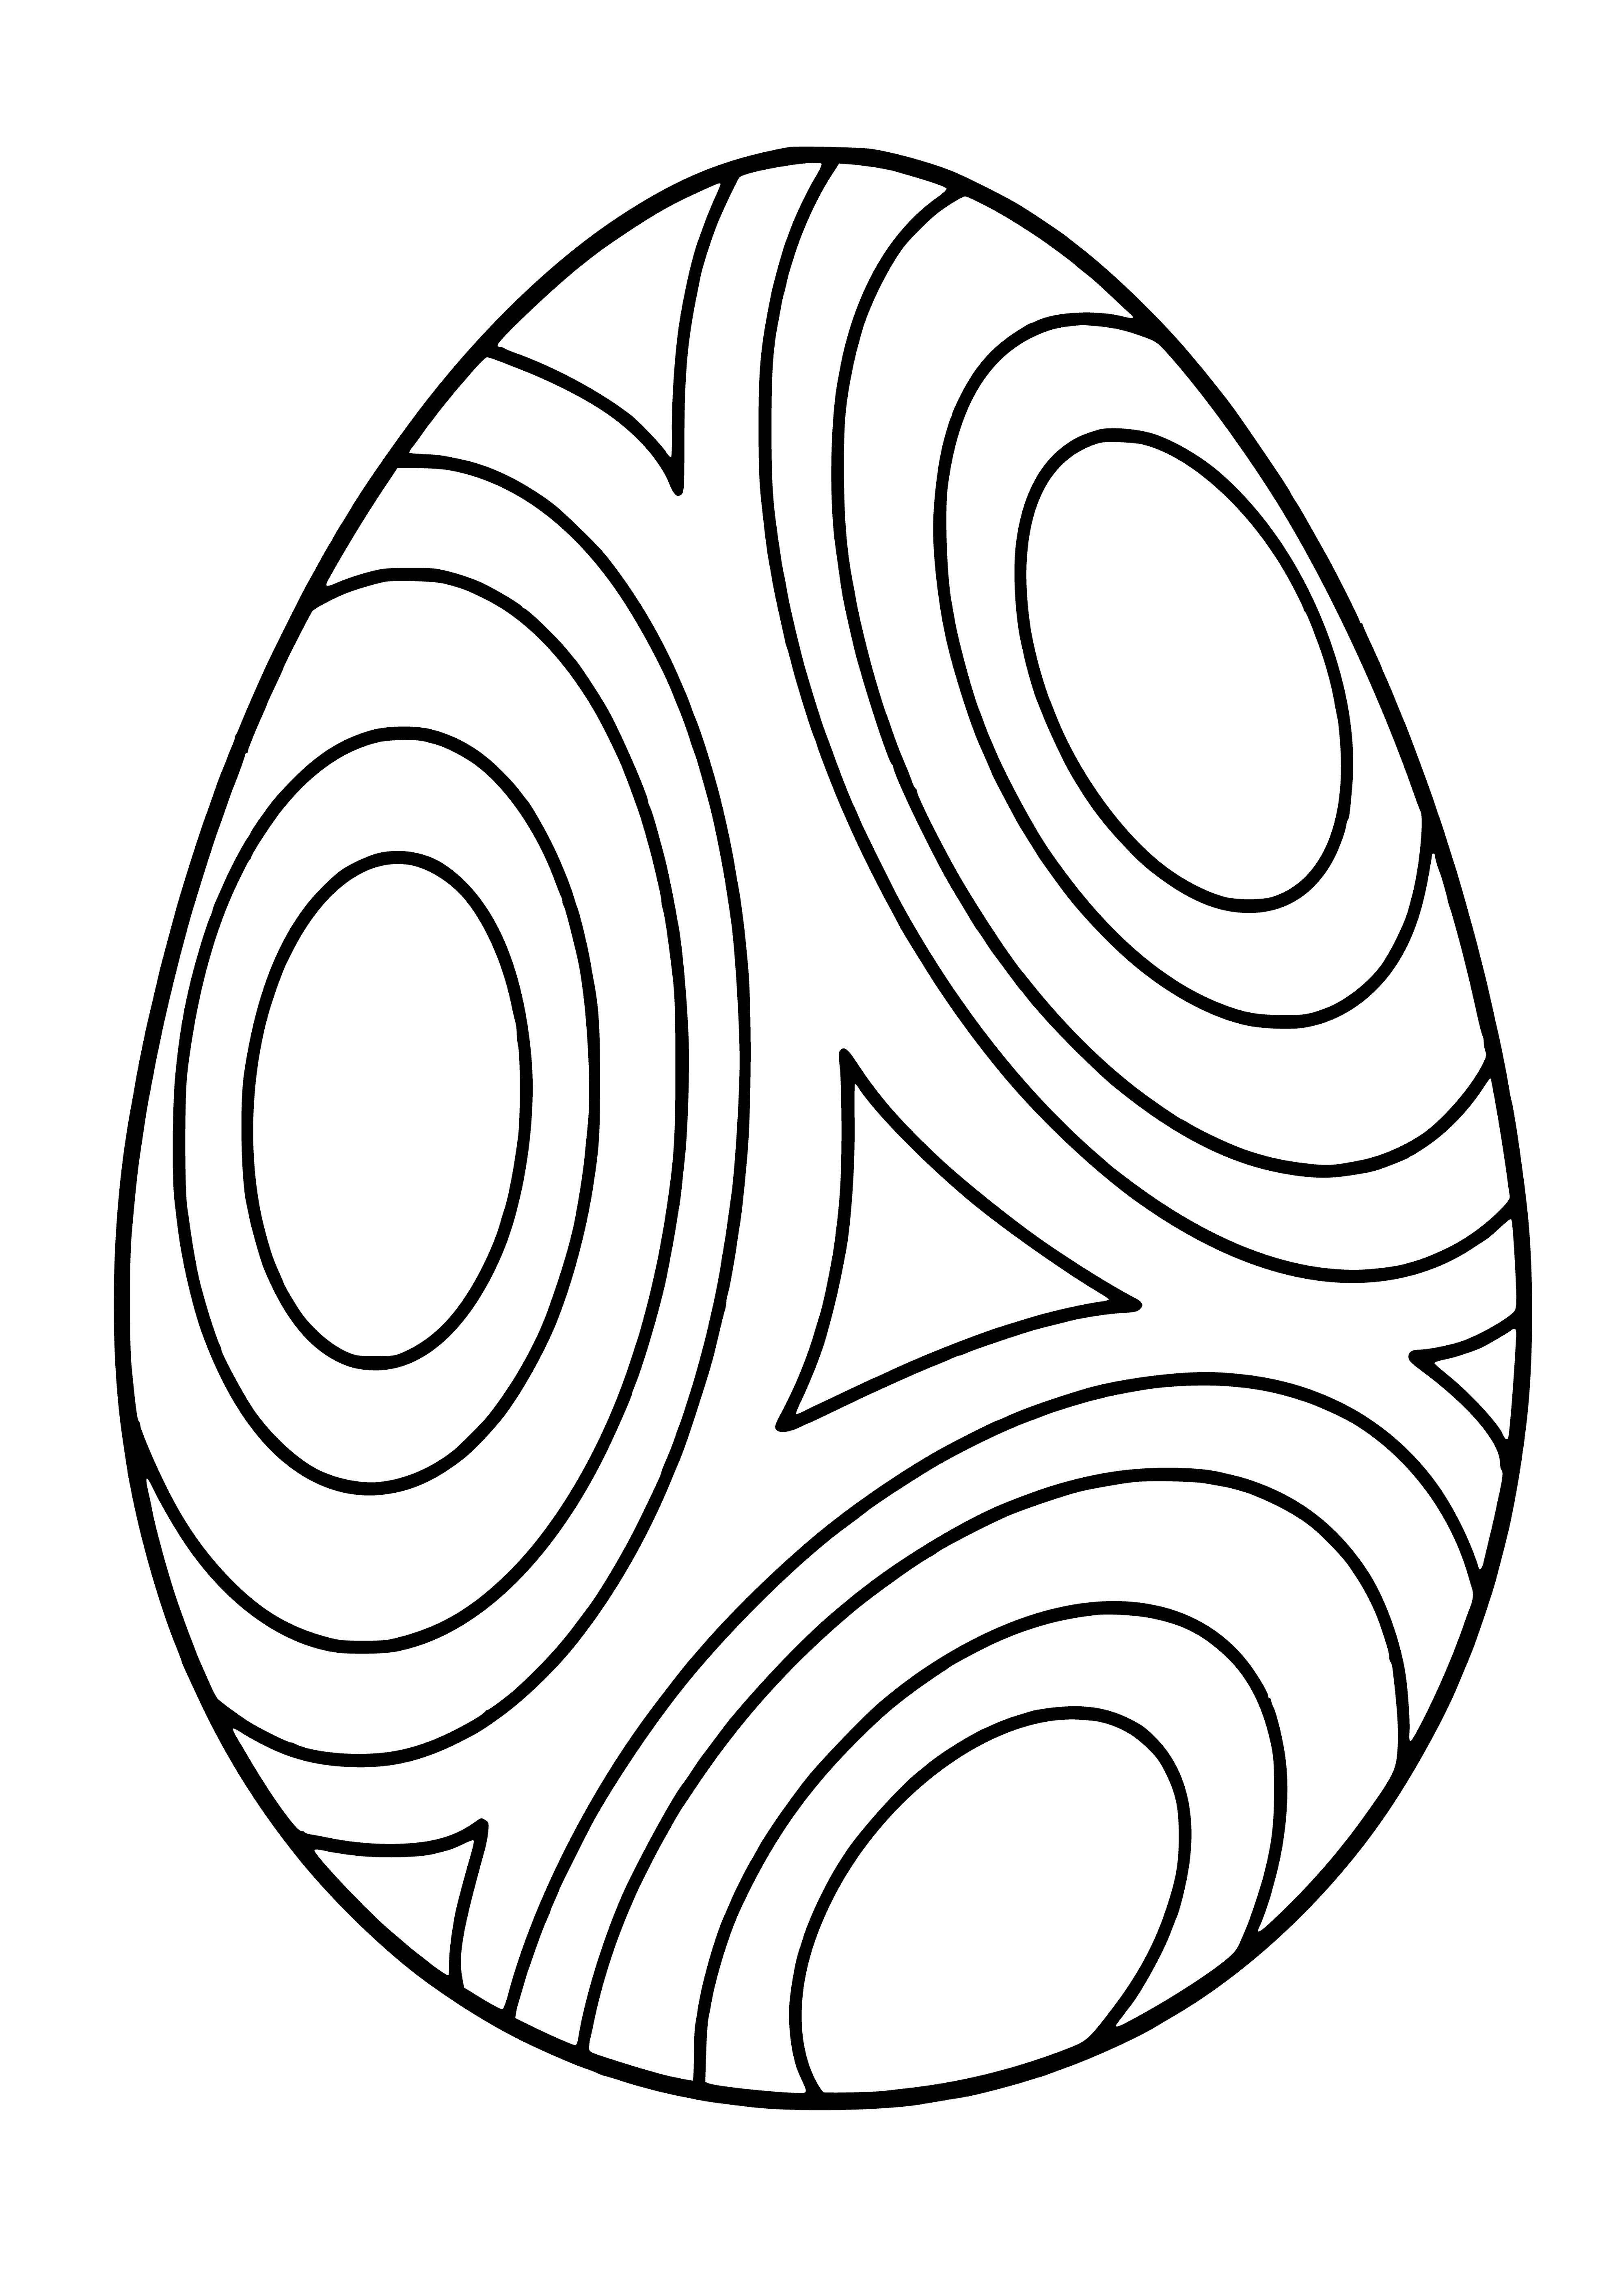 coloring page: A chocolate Easter egg with pink and purple foil lies on a white plate, decorated with a purple ribbon and a child's hand print.